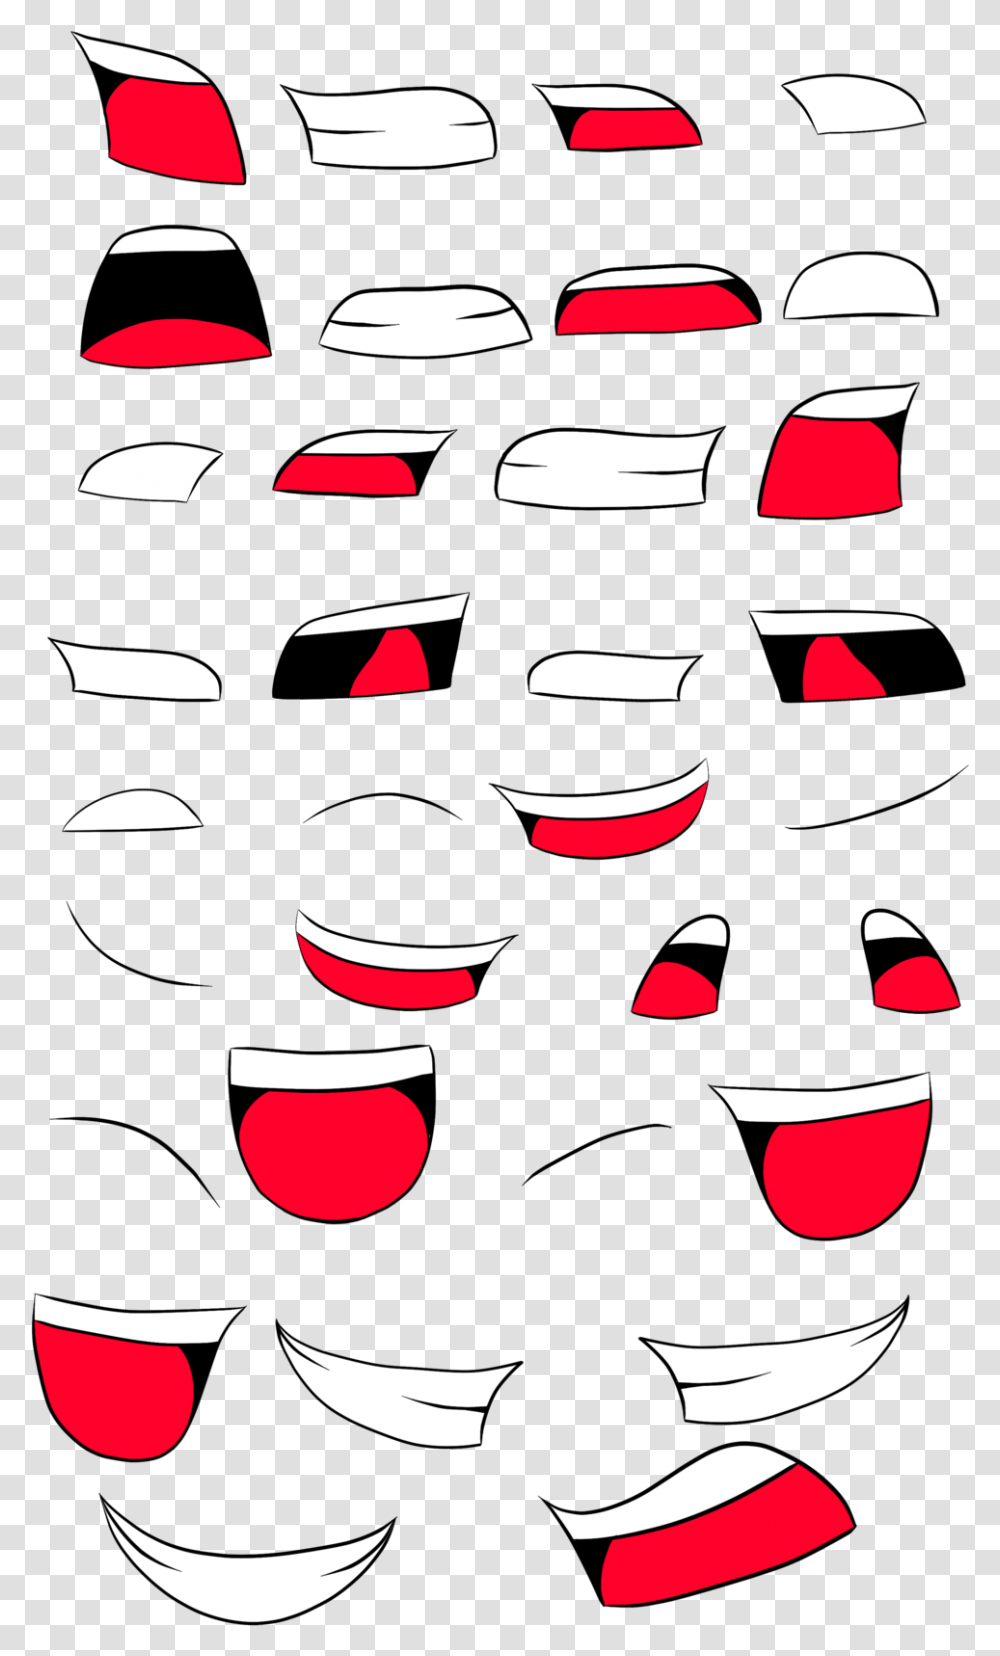 Anime Mouth For Free Download Anime Mouth, Paper, Confetti, Art, Graphics Transparent Png